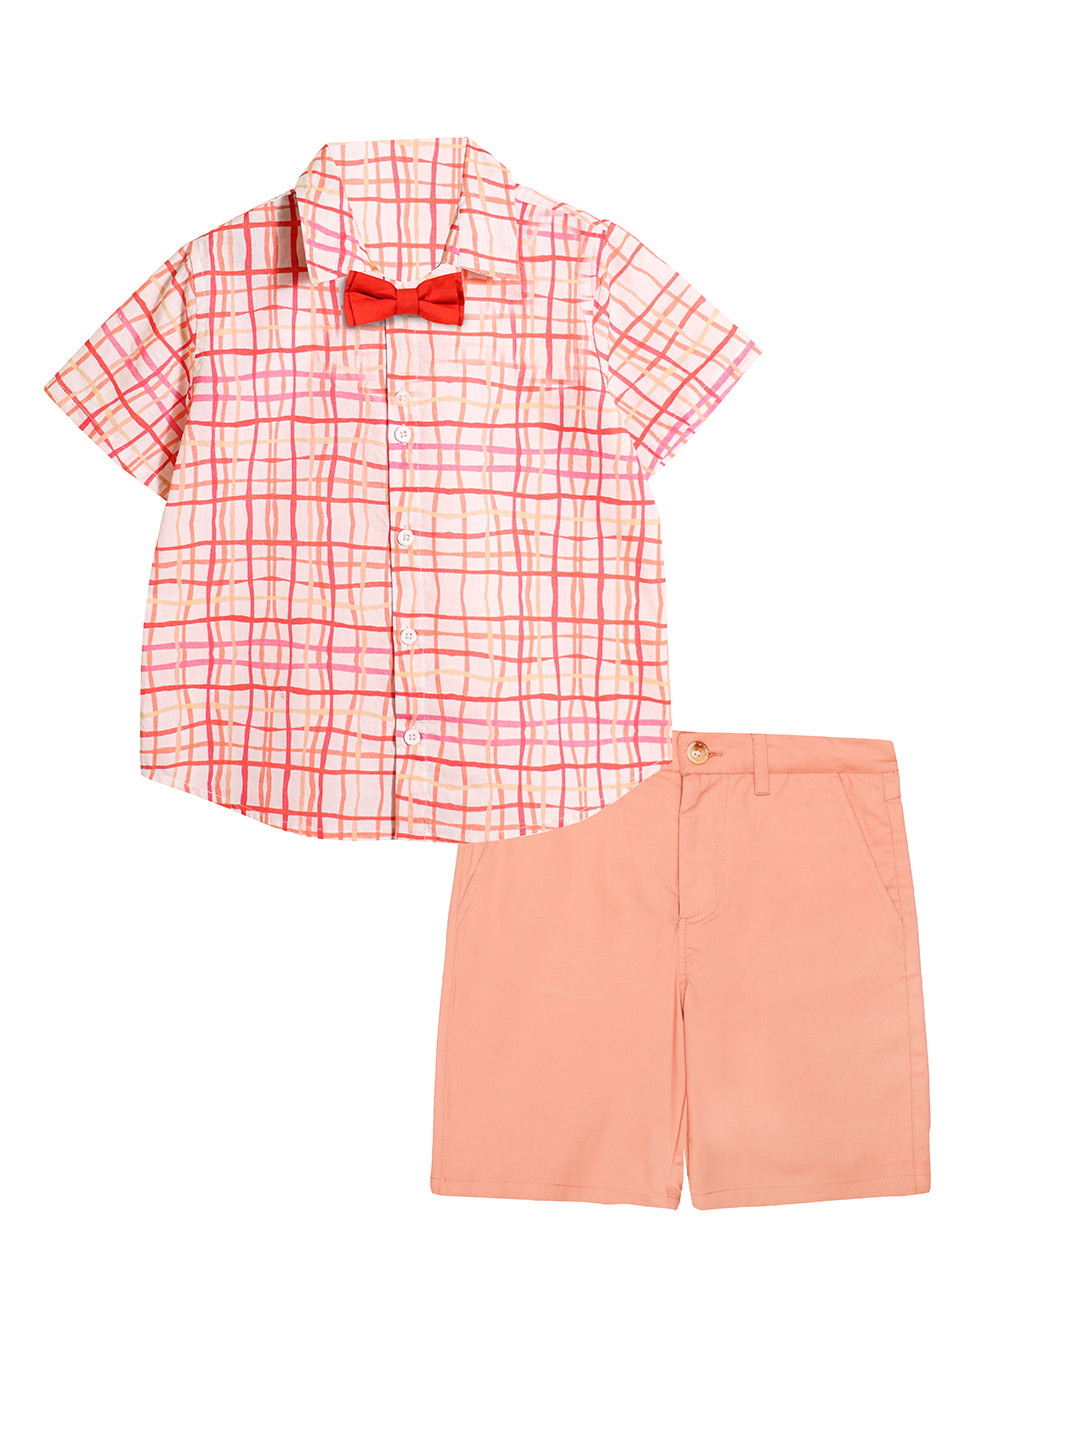 Boys Cotton Pink Check Shirt, Bow & Beige Pink Shorts